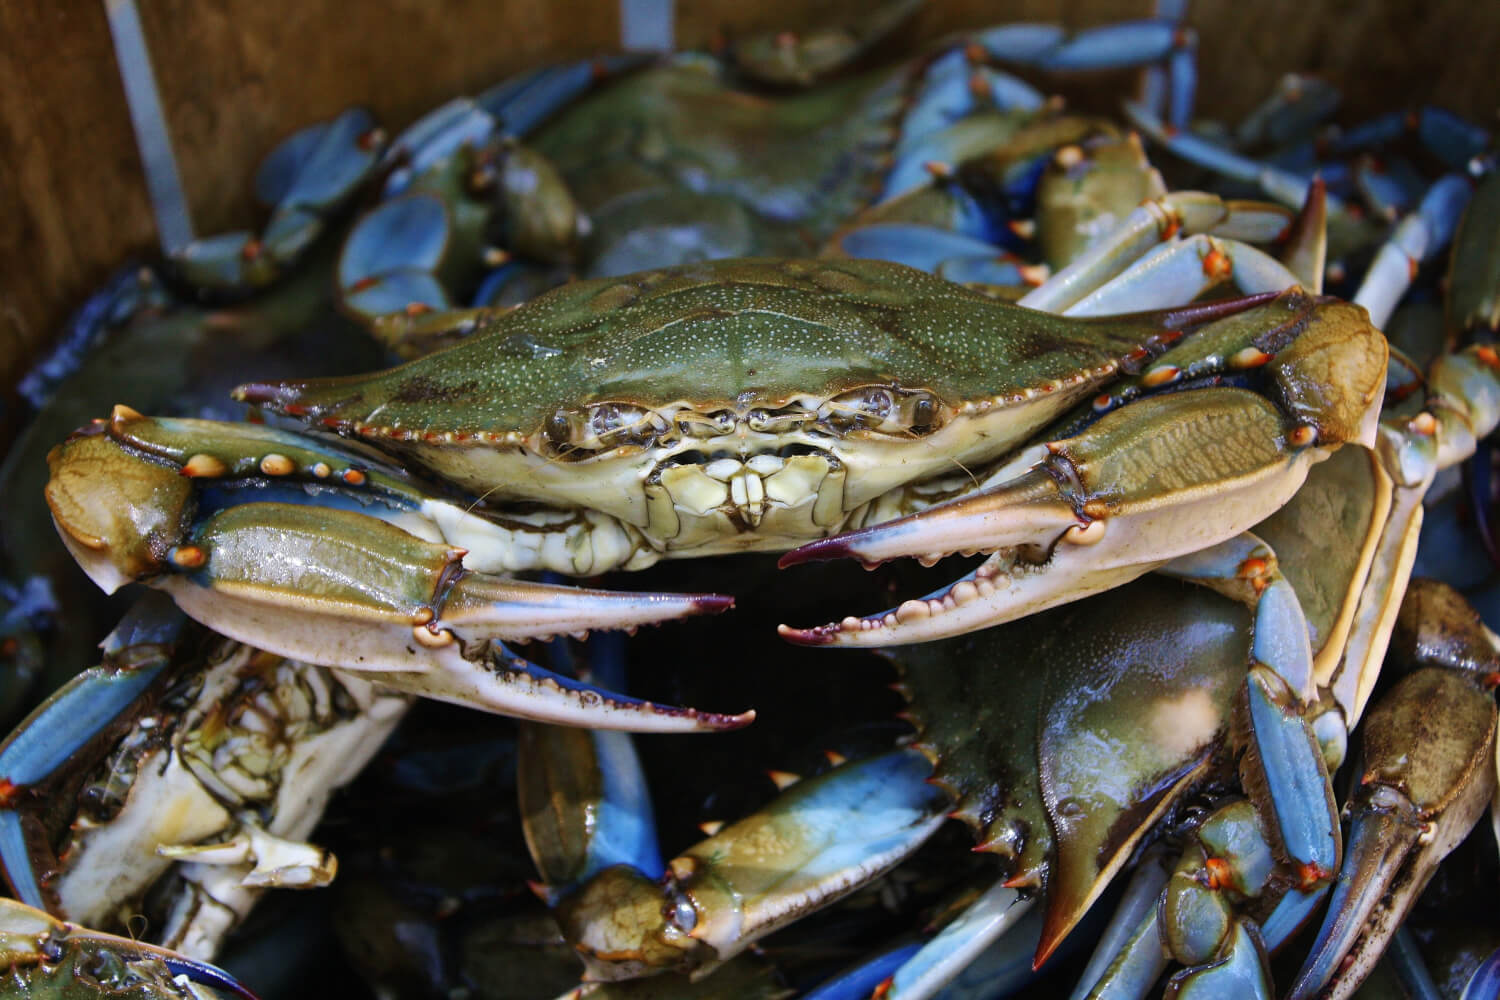 Maryland Blue Crab straight out of the Chester River, Chestertown, MD